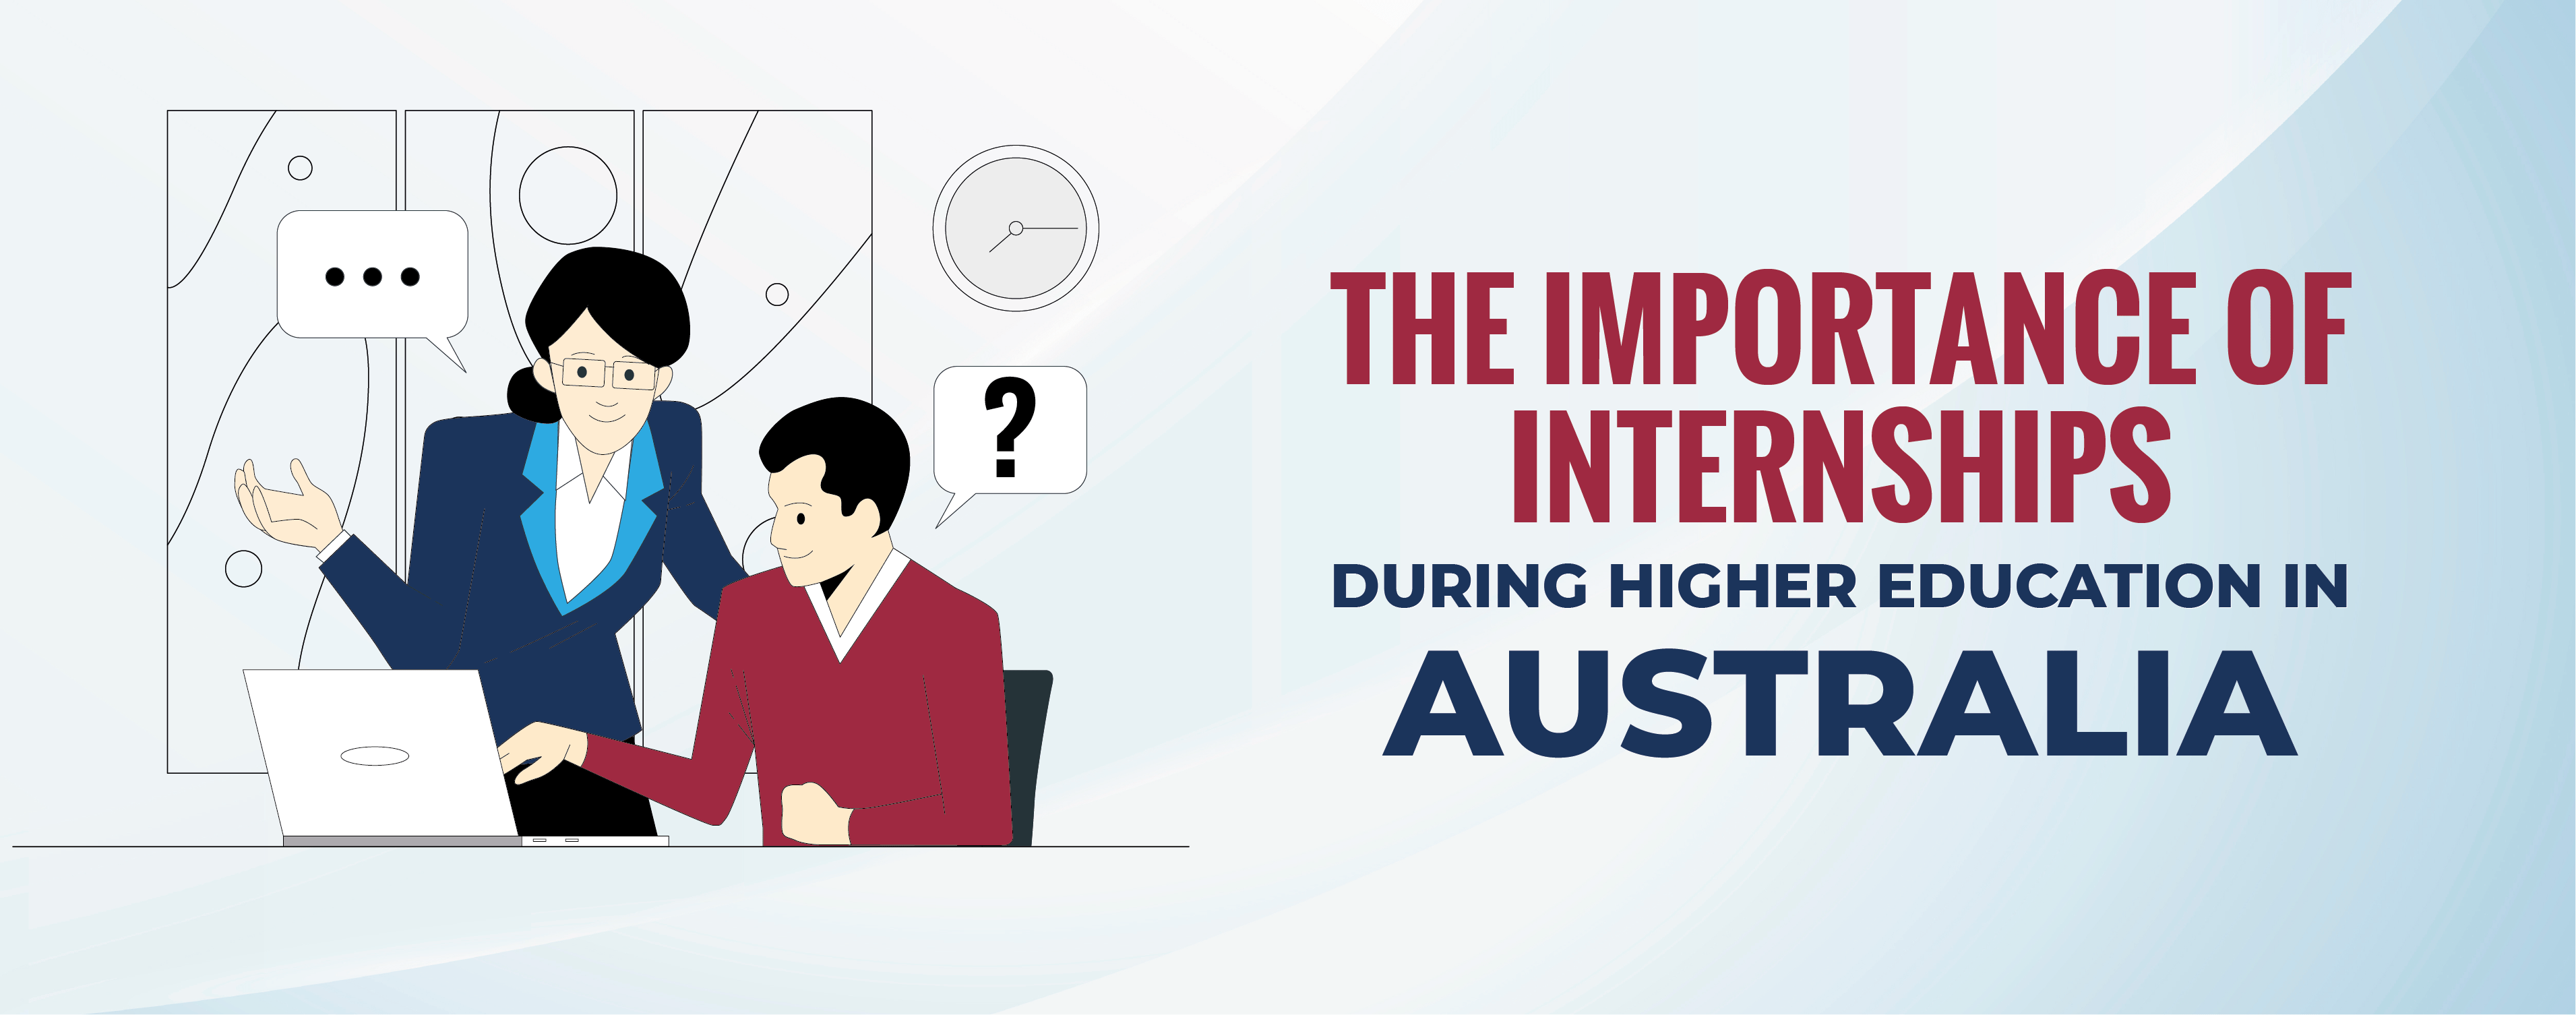 The Importance of Internships During Higher Education in Australia